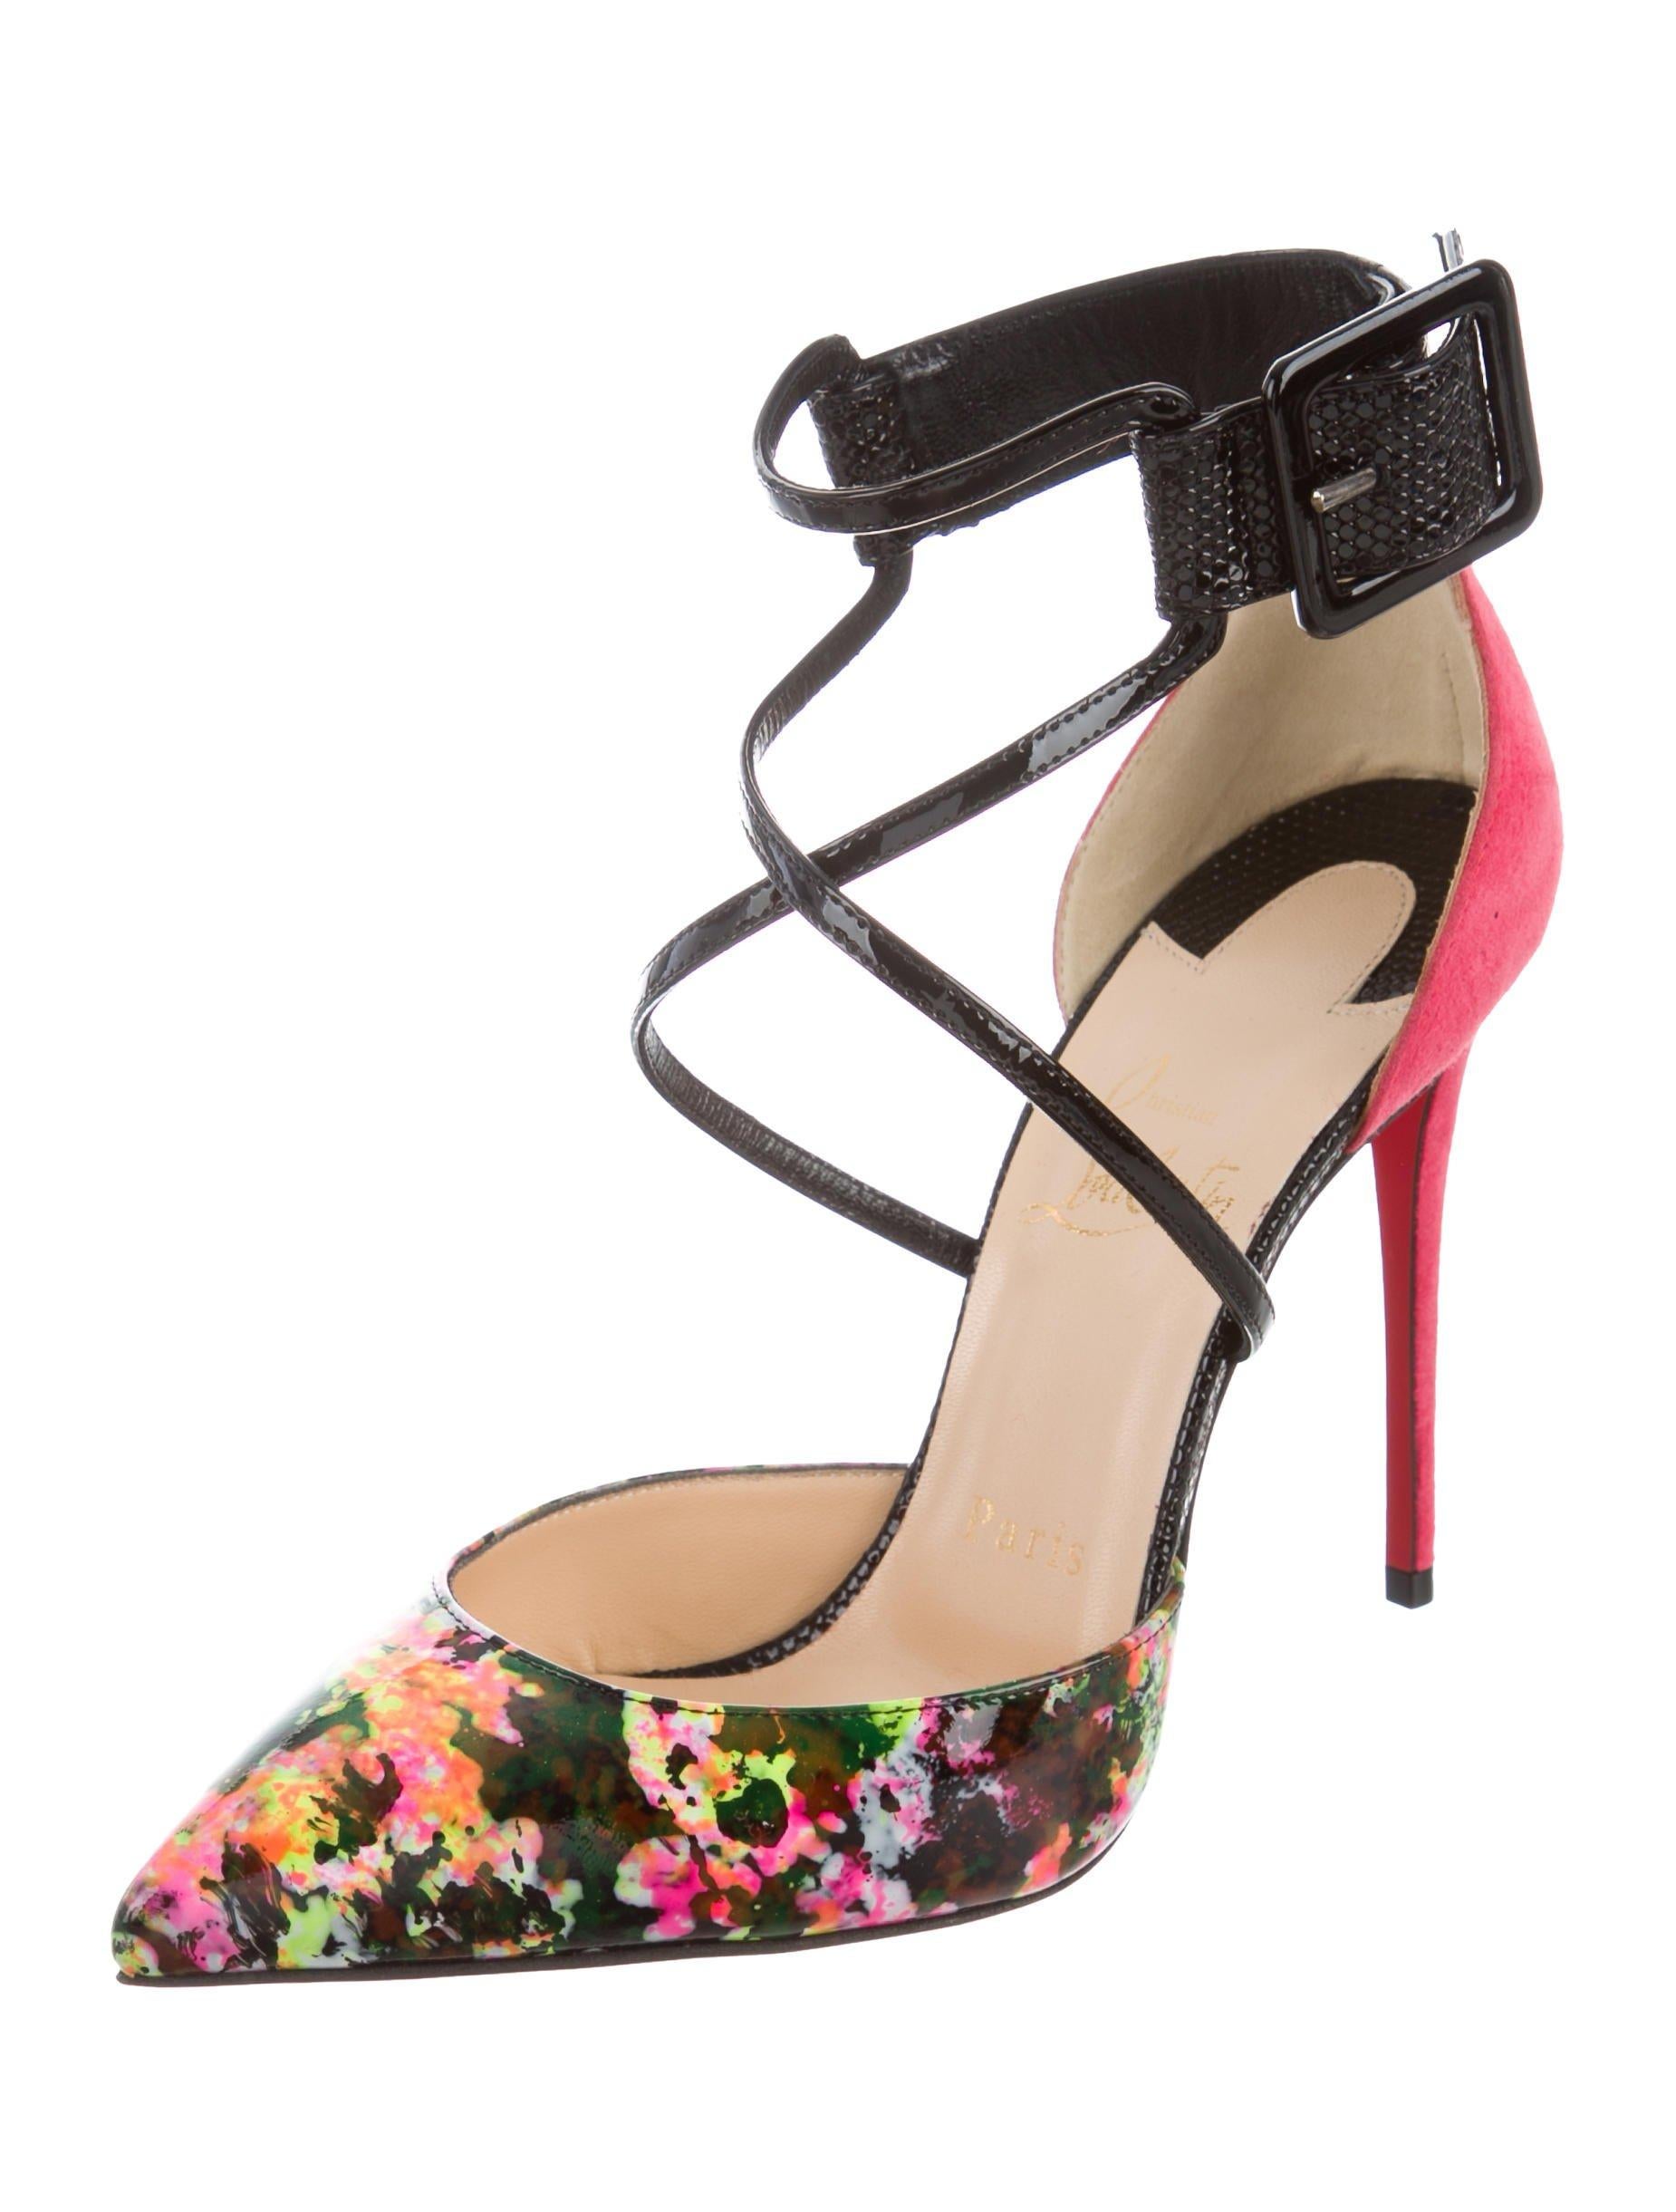 Brown Christian Louboutin NEW Pink Suede Patent Floral Pointy Evening Pumps Heels 